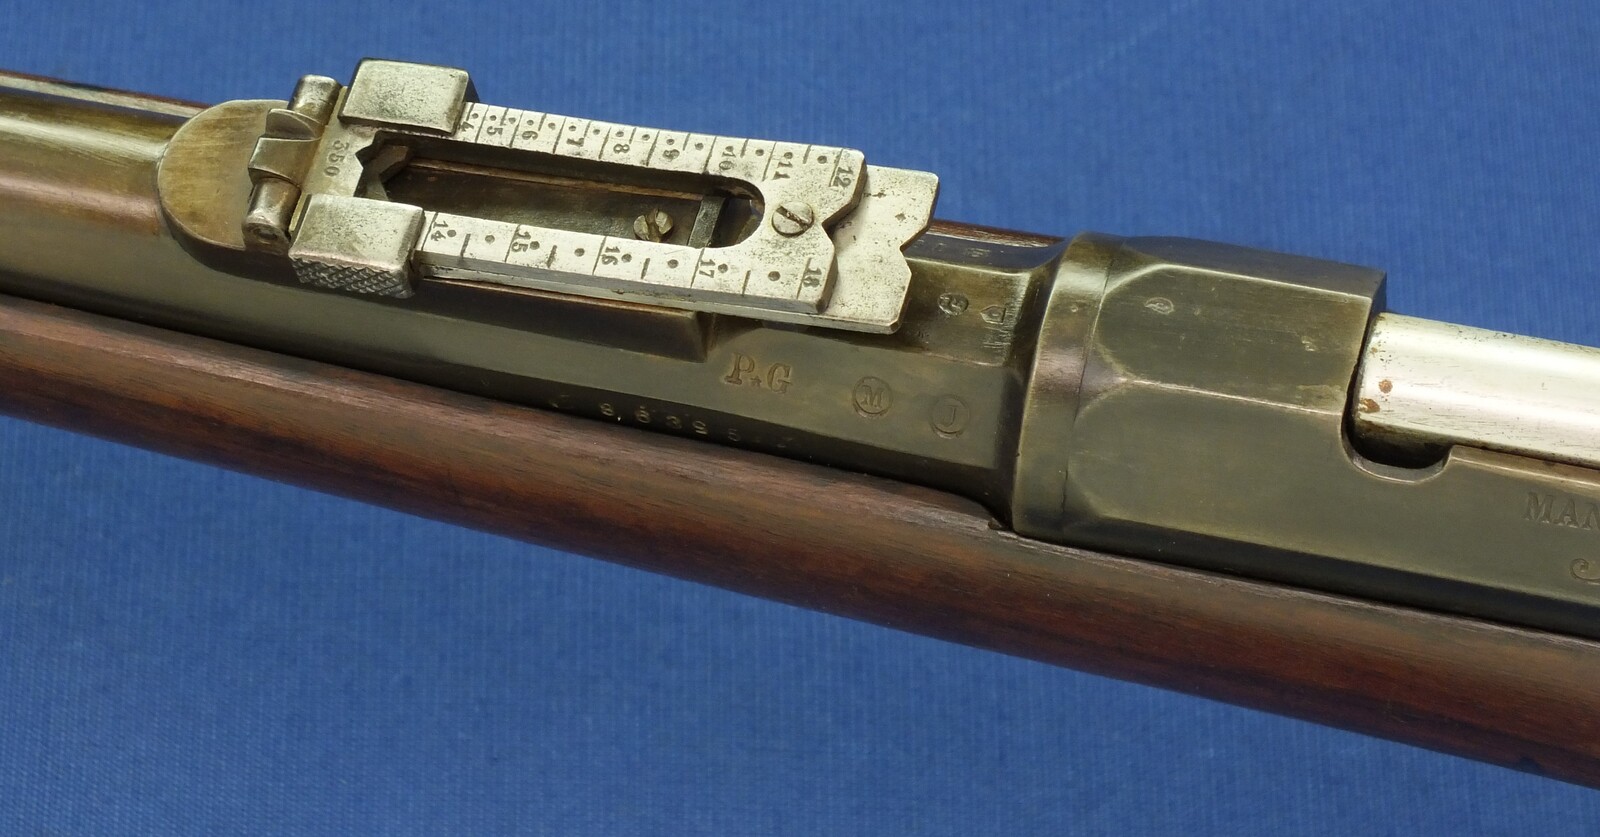 An antique French Gras Infantry Rifle Model 1874, signed Manufacture D'Armes St. Etienne Mle 1874, caliber 11 X 59R Gras, length 131 cm. in very good condition. Price 1.500 euro.